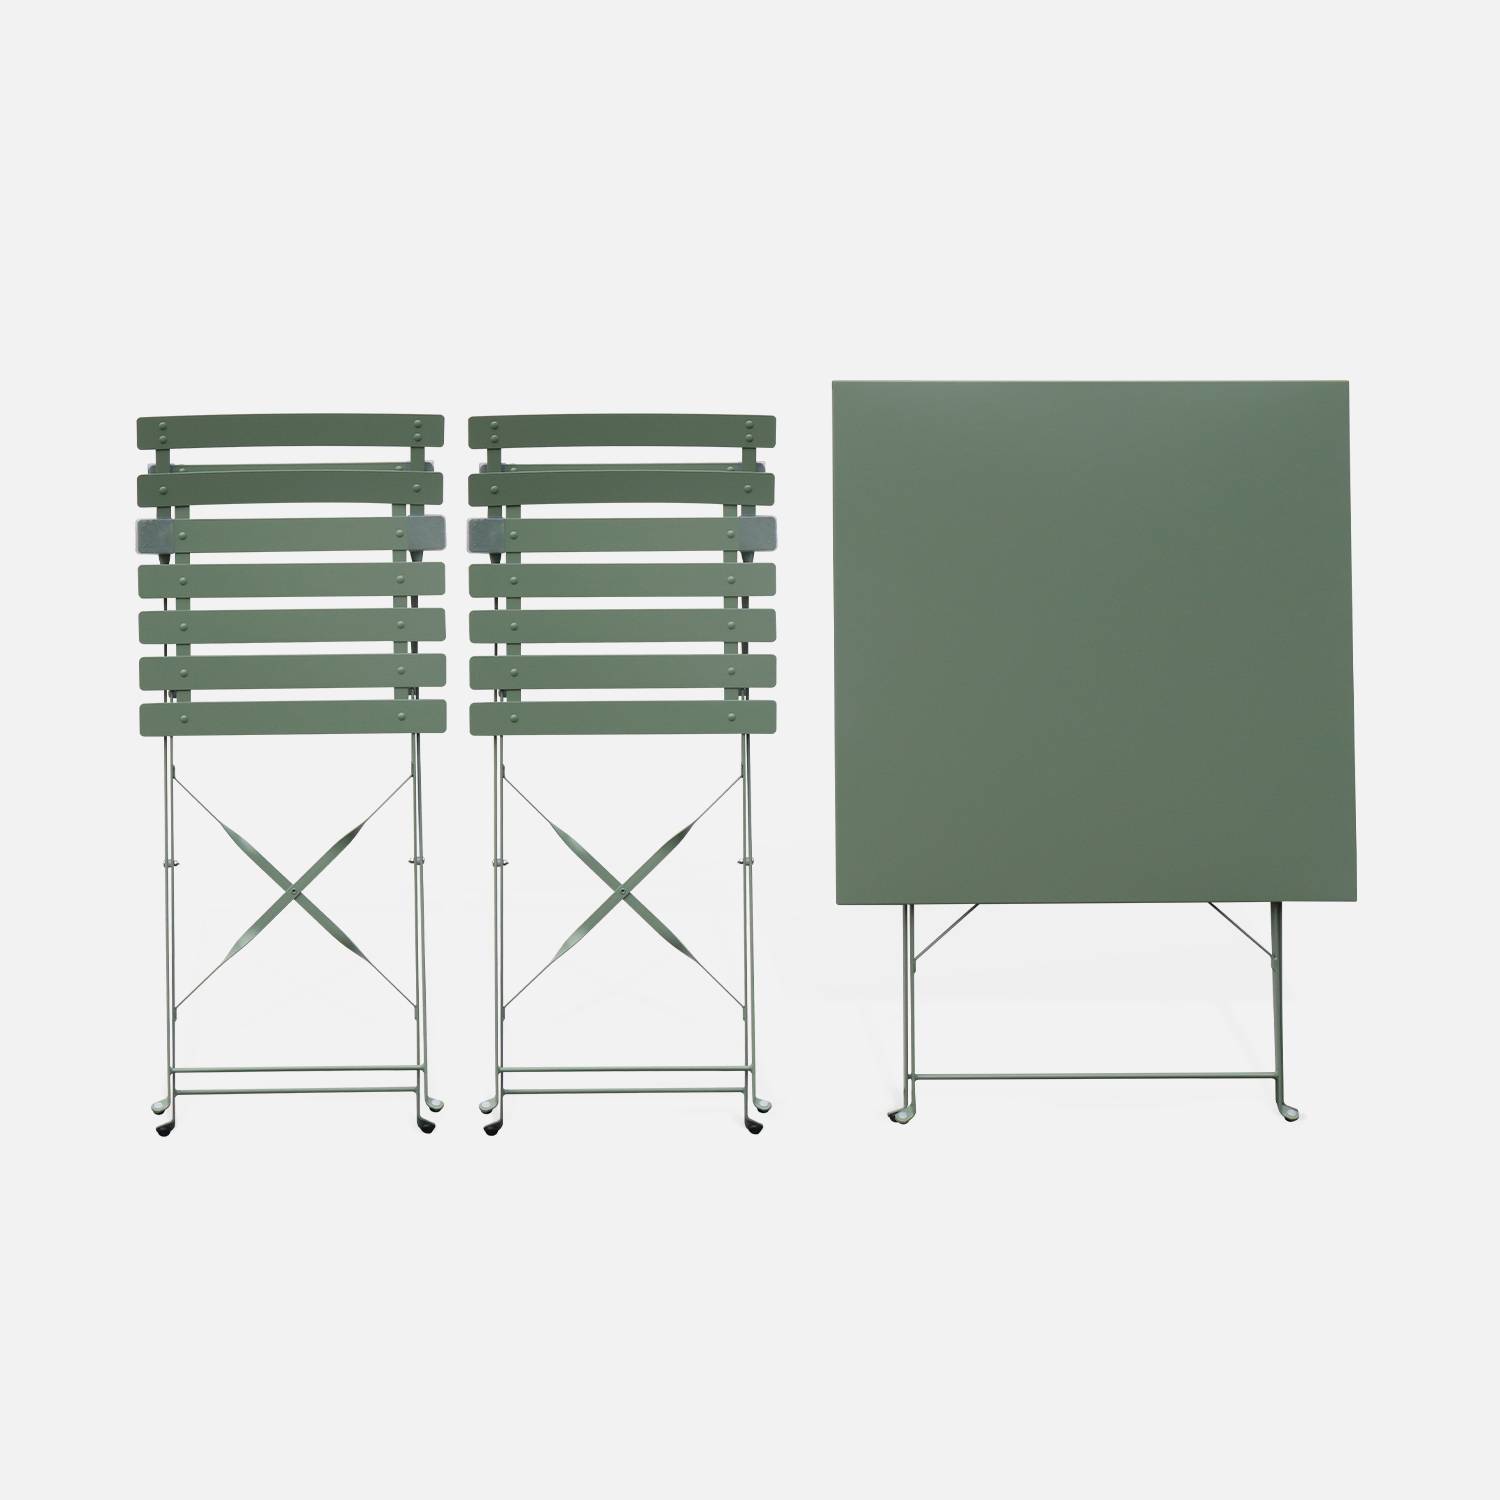 2-seater foldable thermo-lacquered steel bistro garden table with chairs, 70x70cm - Emilia - Sage geen Photo6